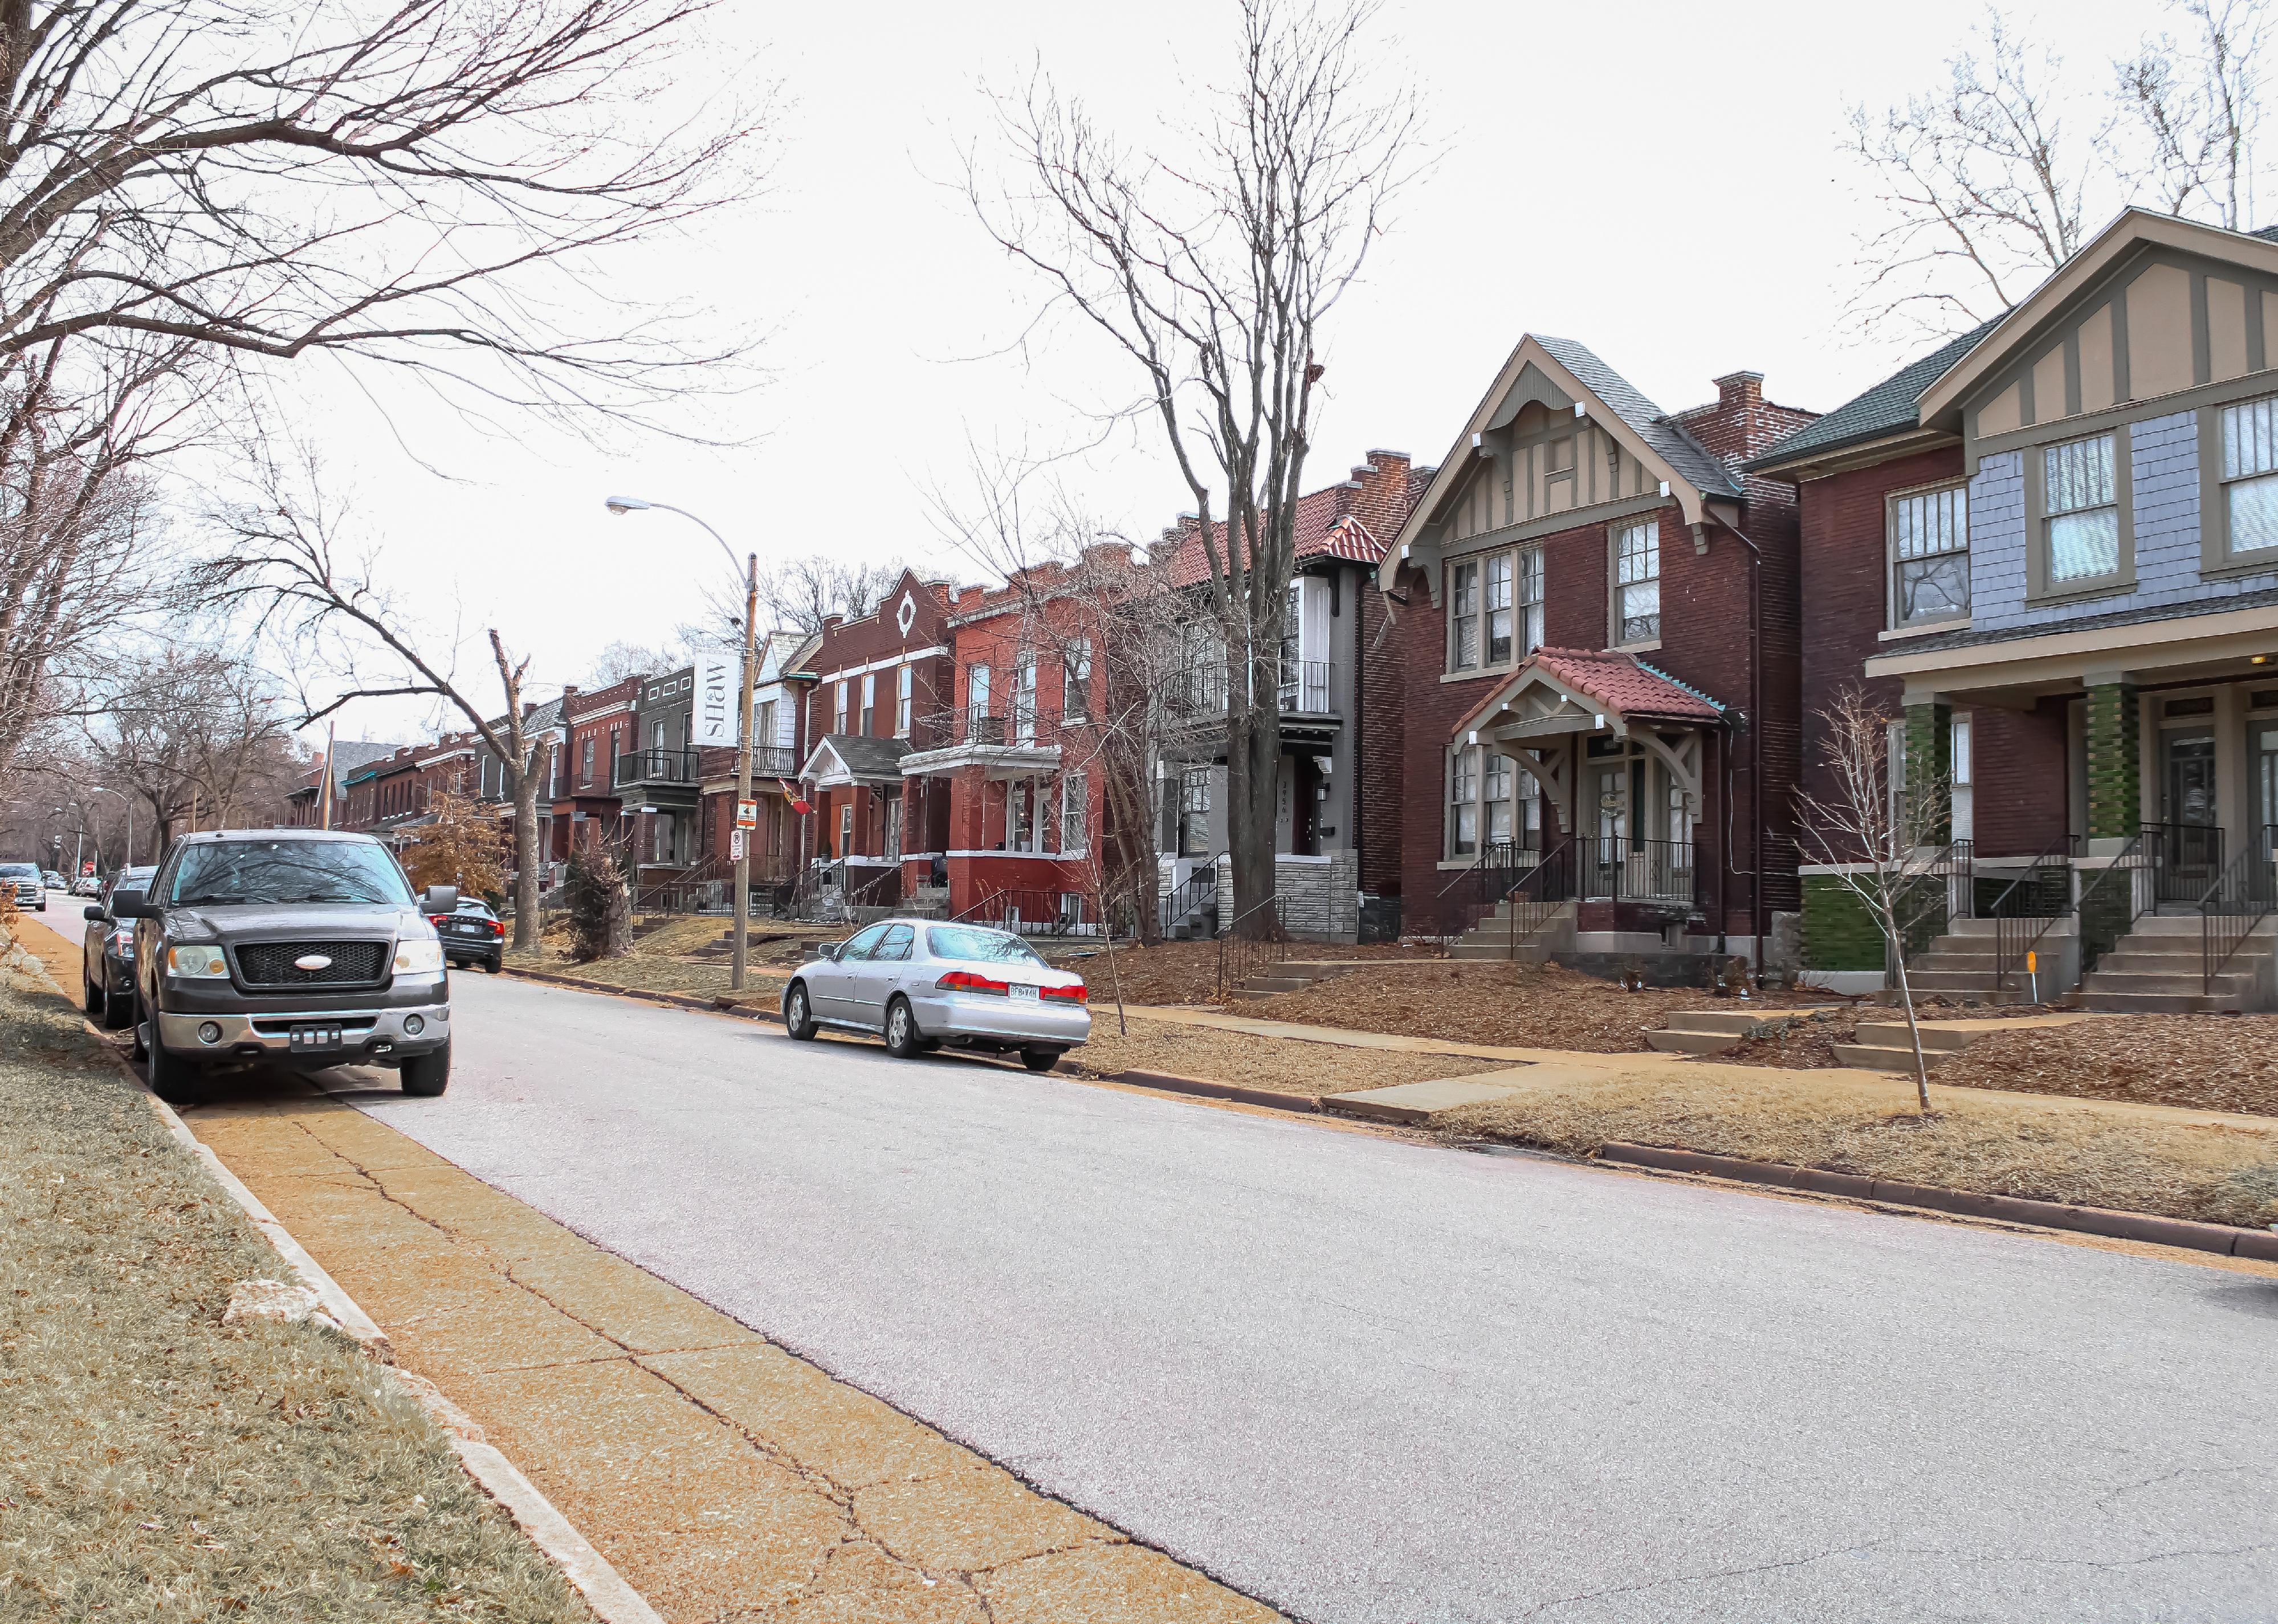 St. Louis, Missouri street with colorful historic homes during the winter.